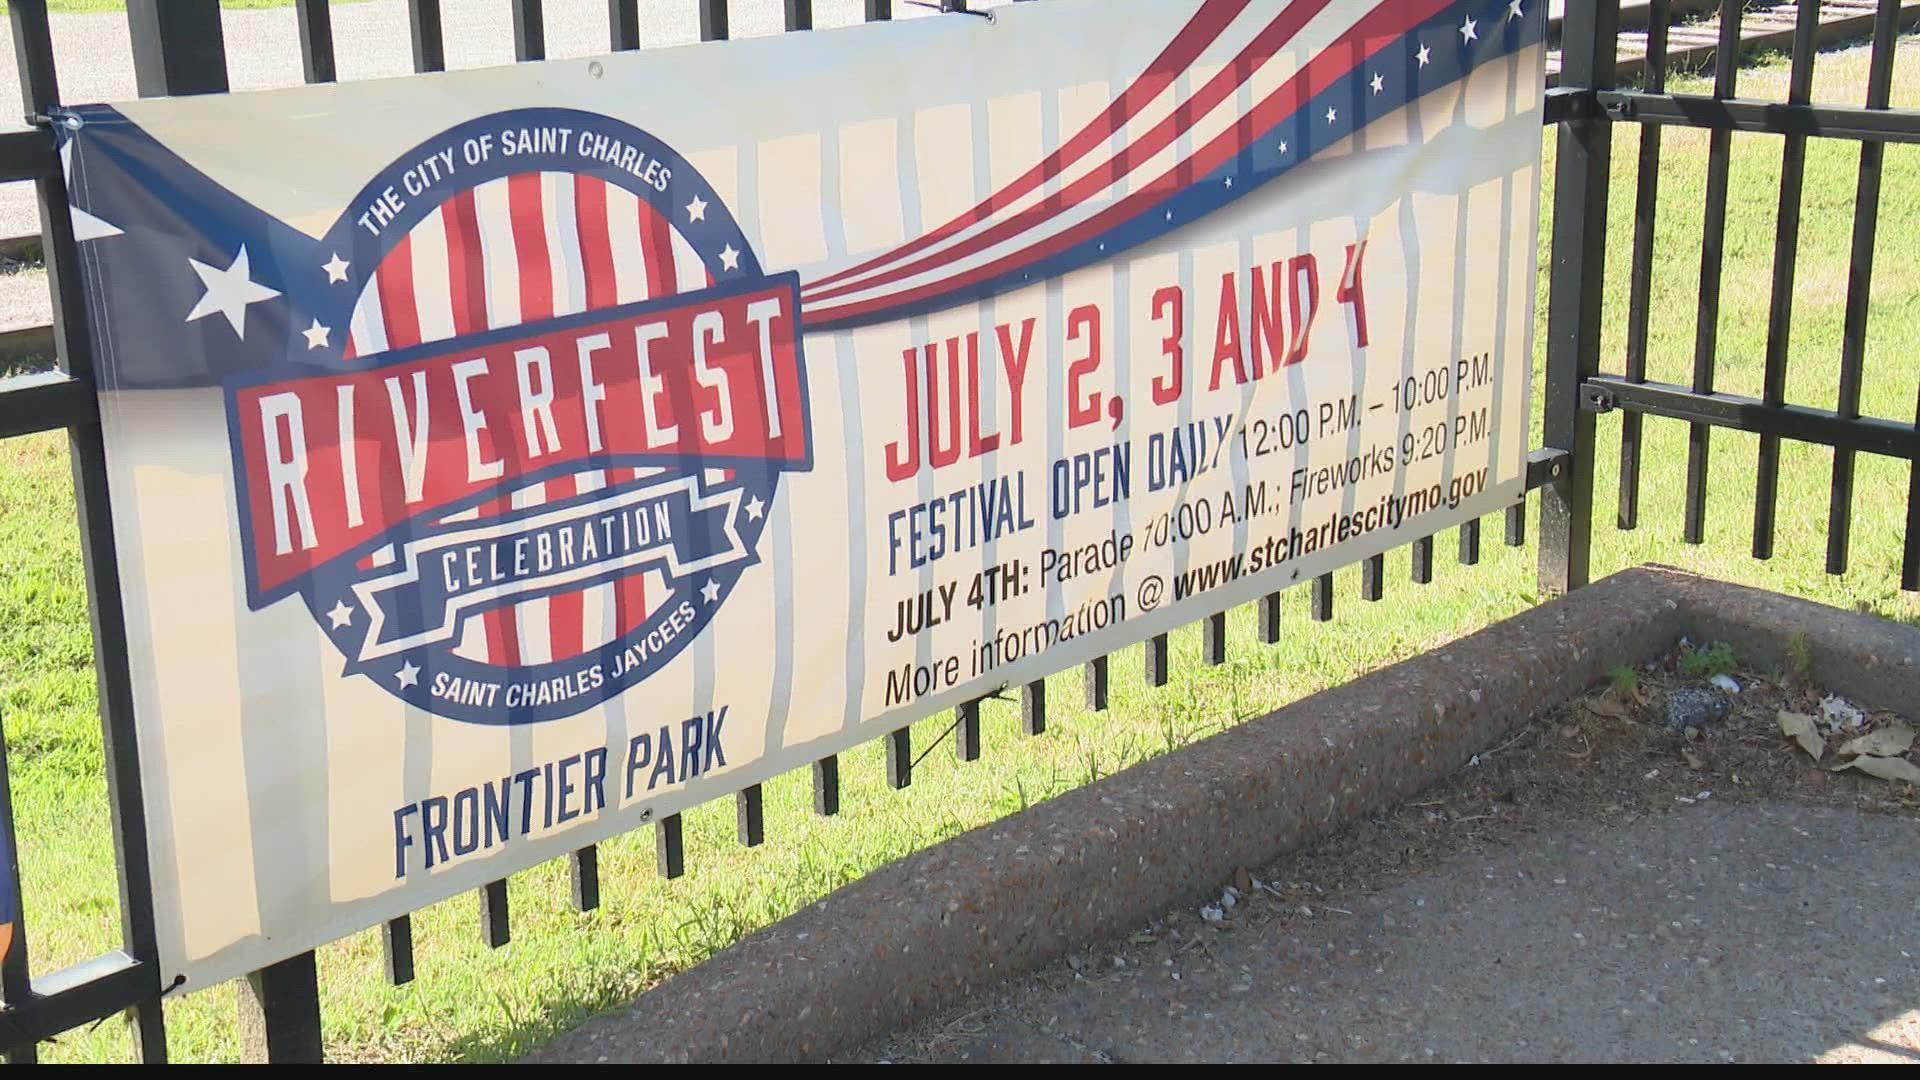 Fireworks, funnel cakes and balloon animals.. oh my! You can find all of this and more at the St. Charles Riverfest this weekend.